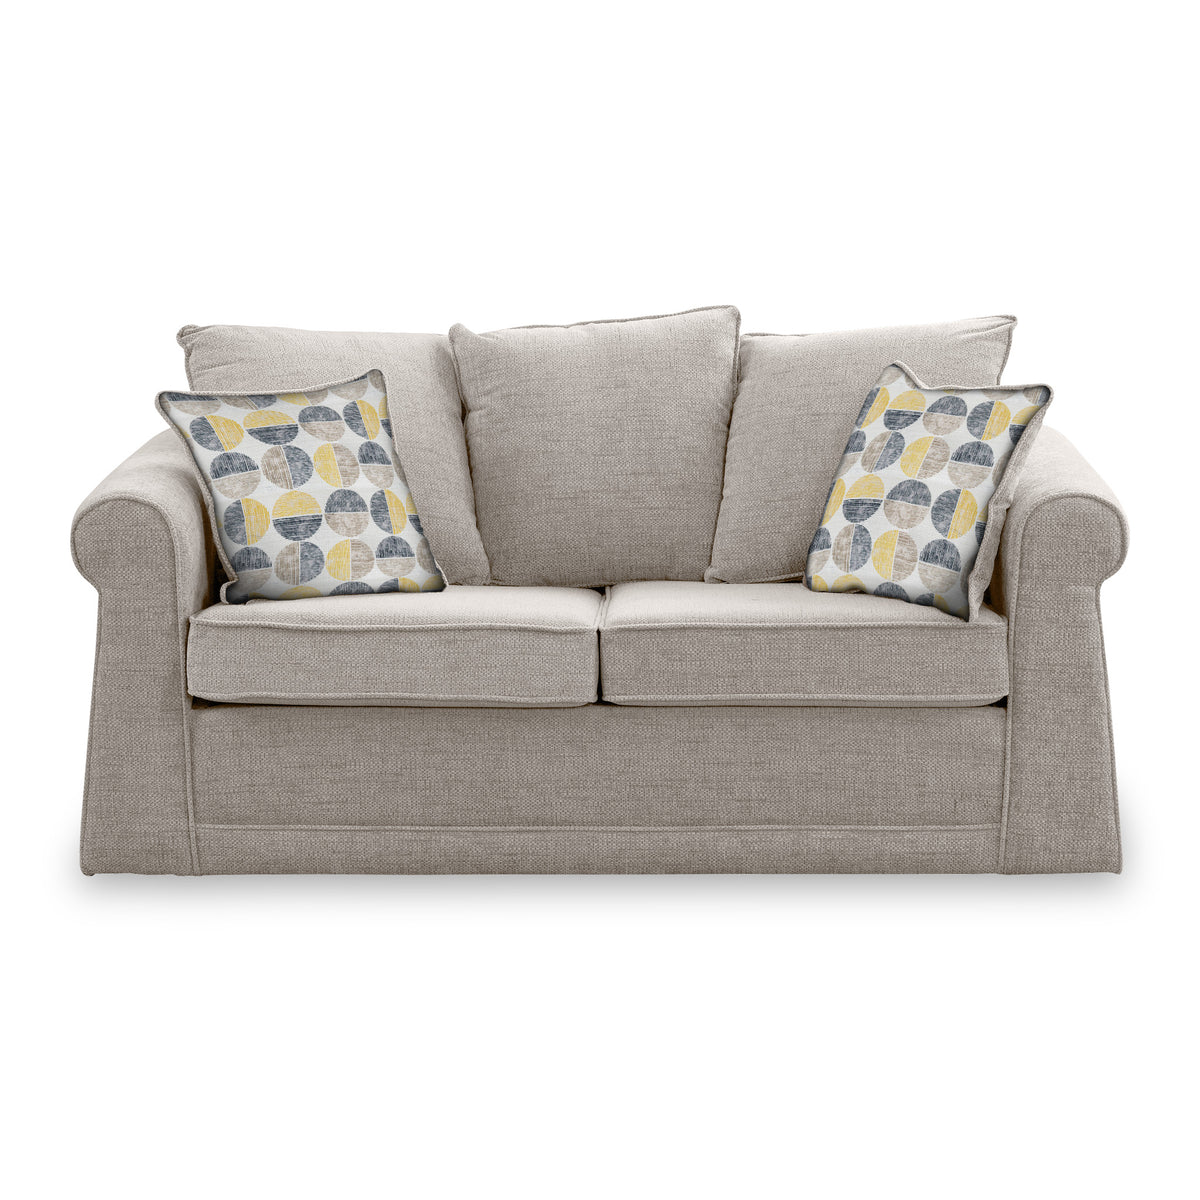 Branston Oatmeal Soft Weave 2 Seater Sofabed with Beige Scatter Cushions from Roseland Furniture